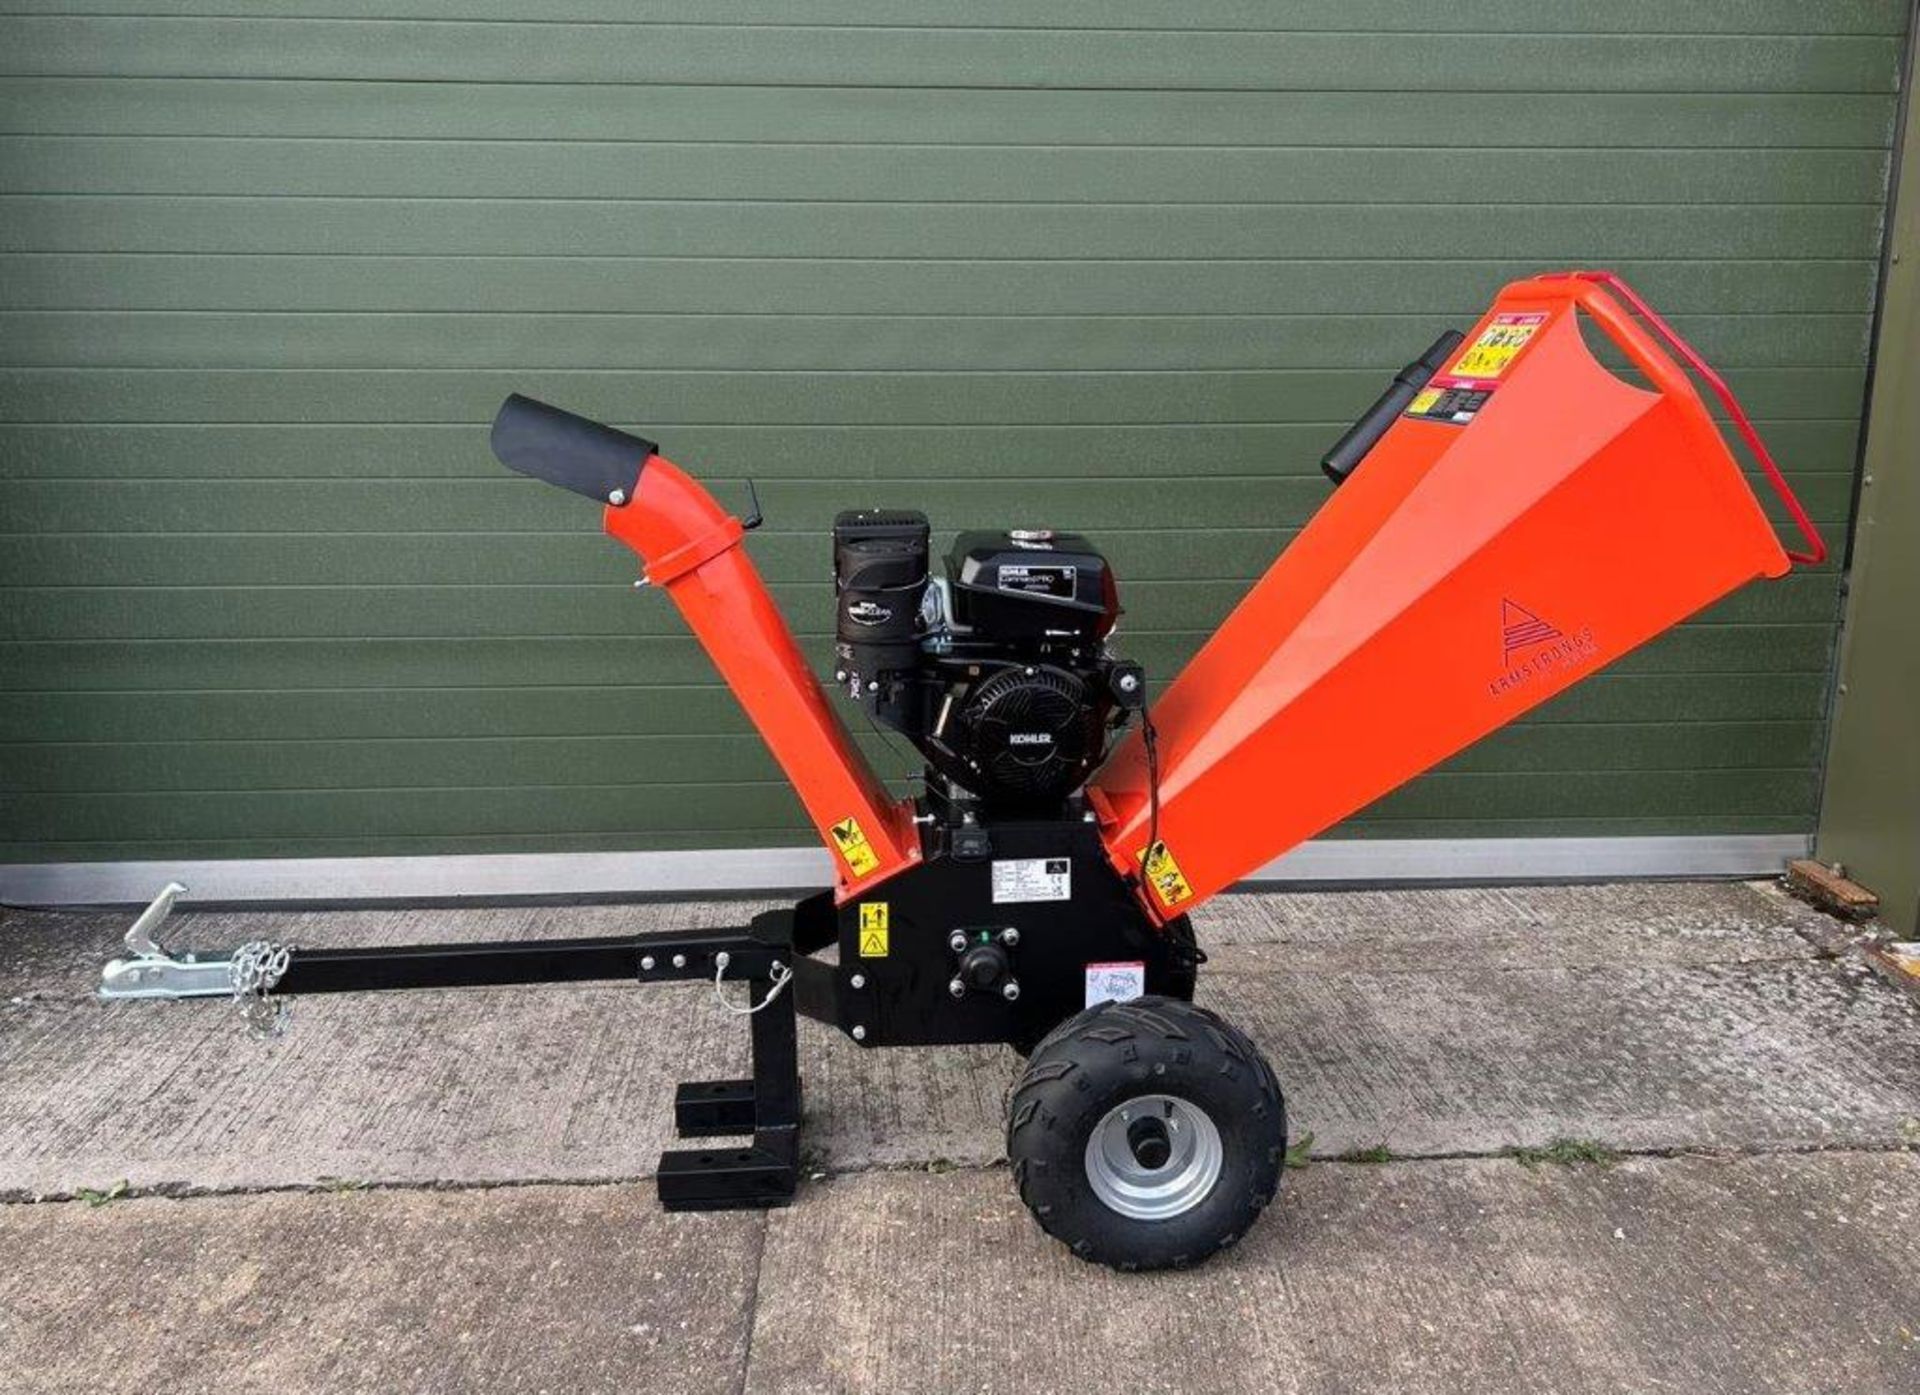 Brand New and unused, Armstrong DR-GS-15H Electric start Petrol Wood Chipper